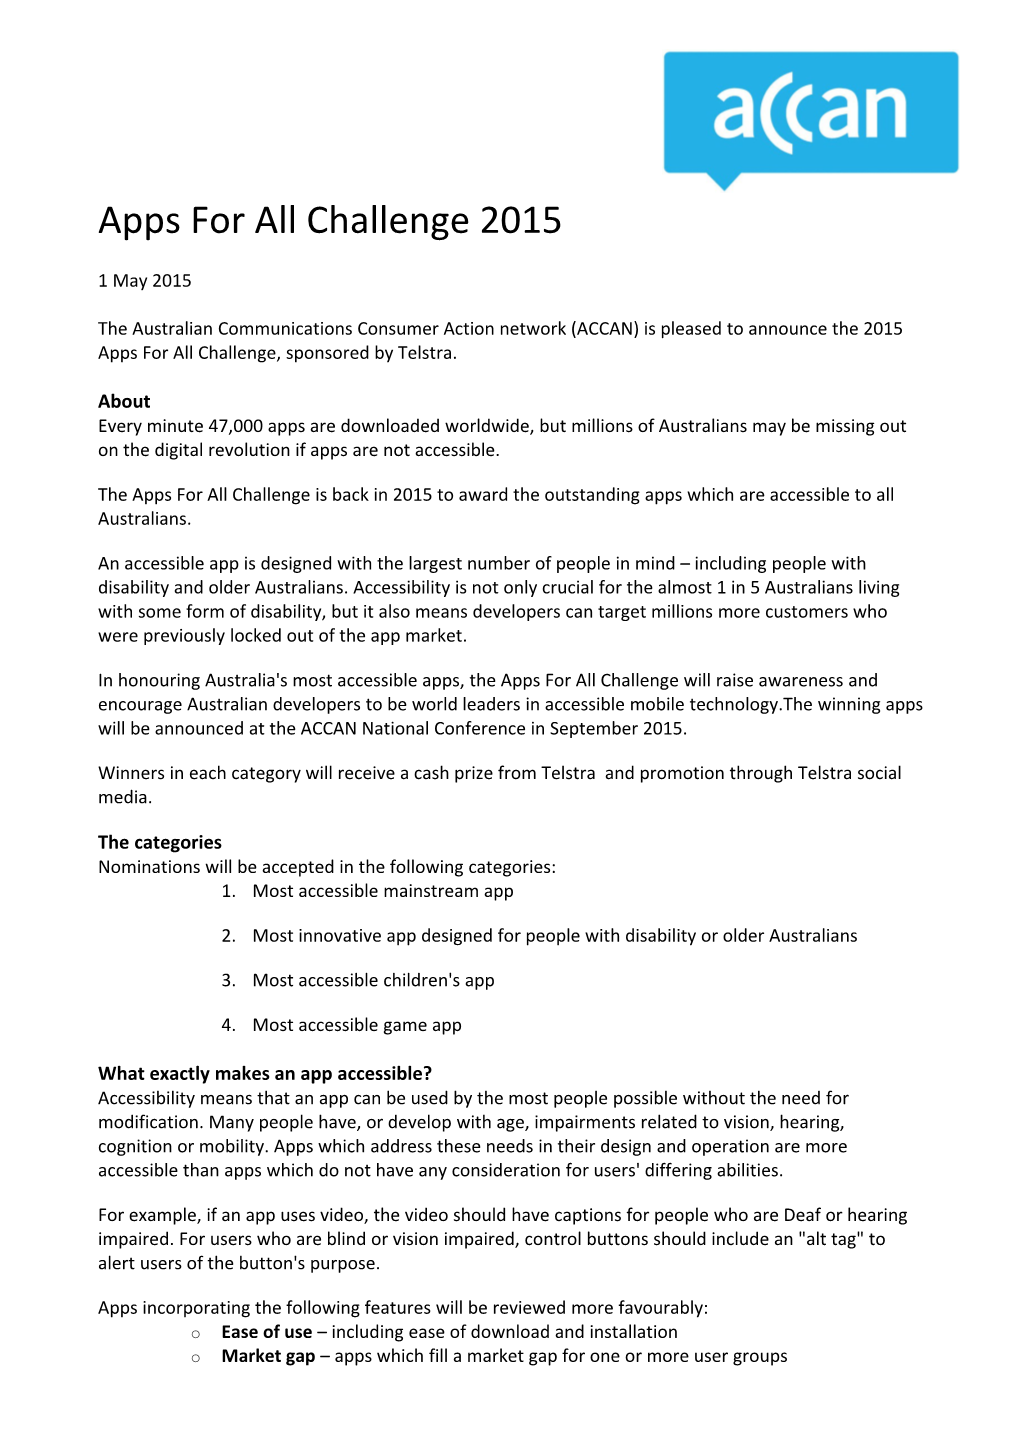 Apps for All Challenge 2015